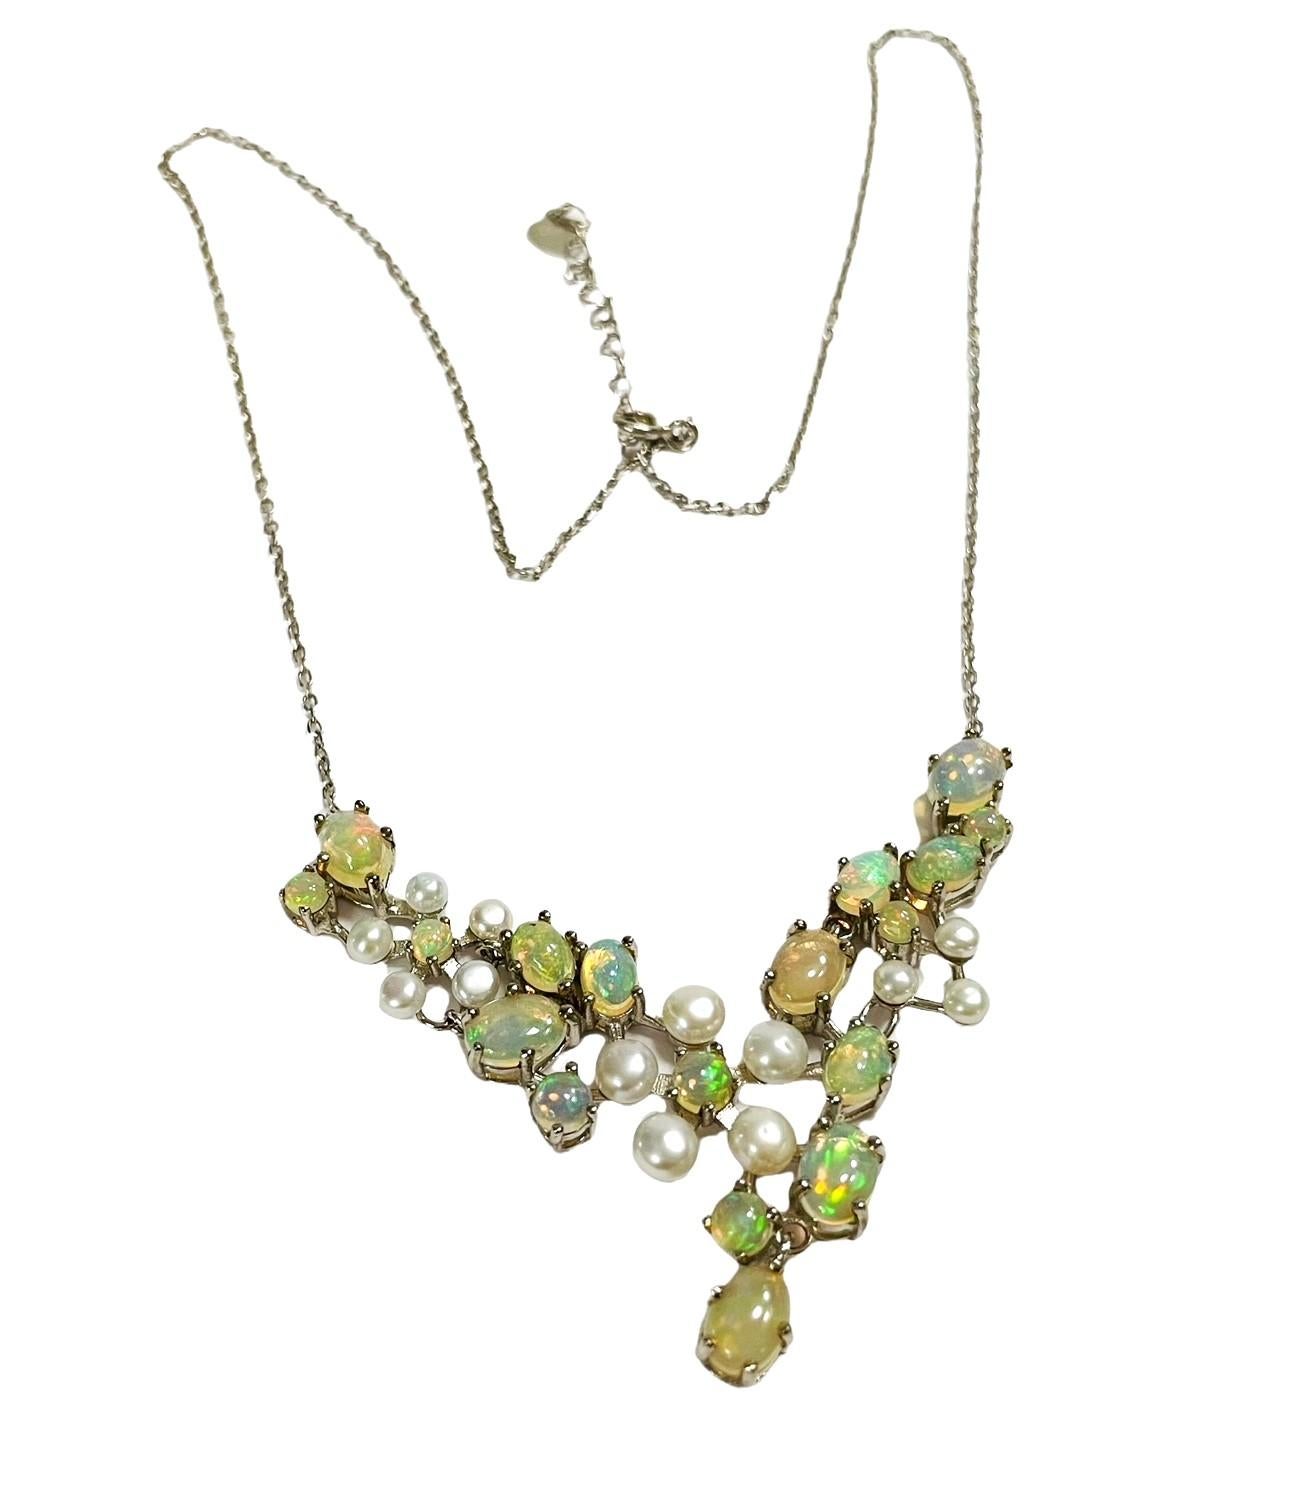 Just a beautiful necklace.  The opals are exceptional.  Full of colors.  They are complemented by small pearls in the design It is 18